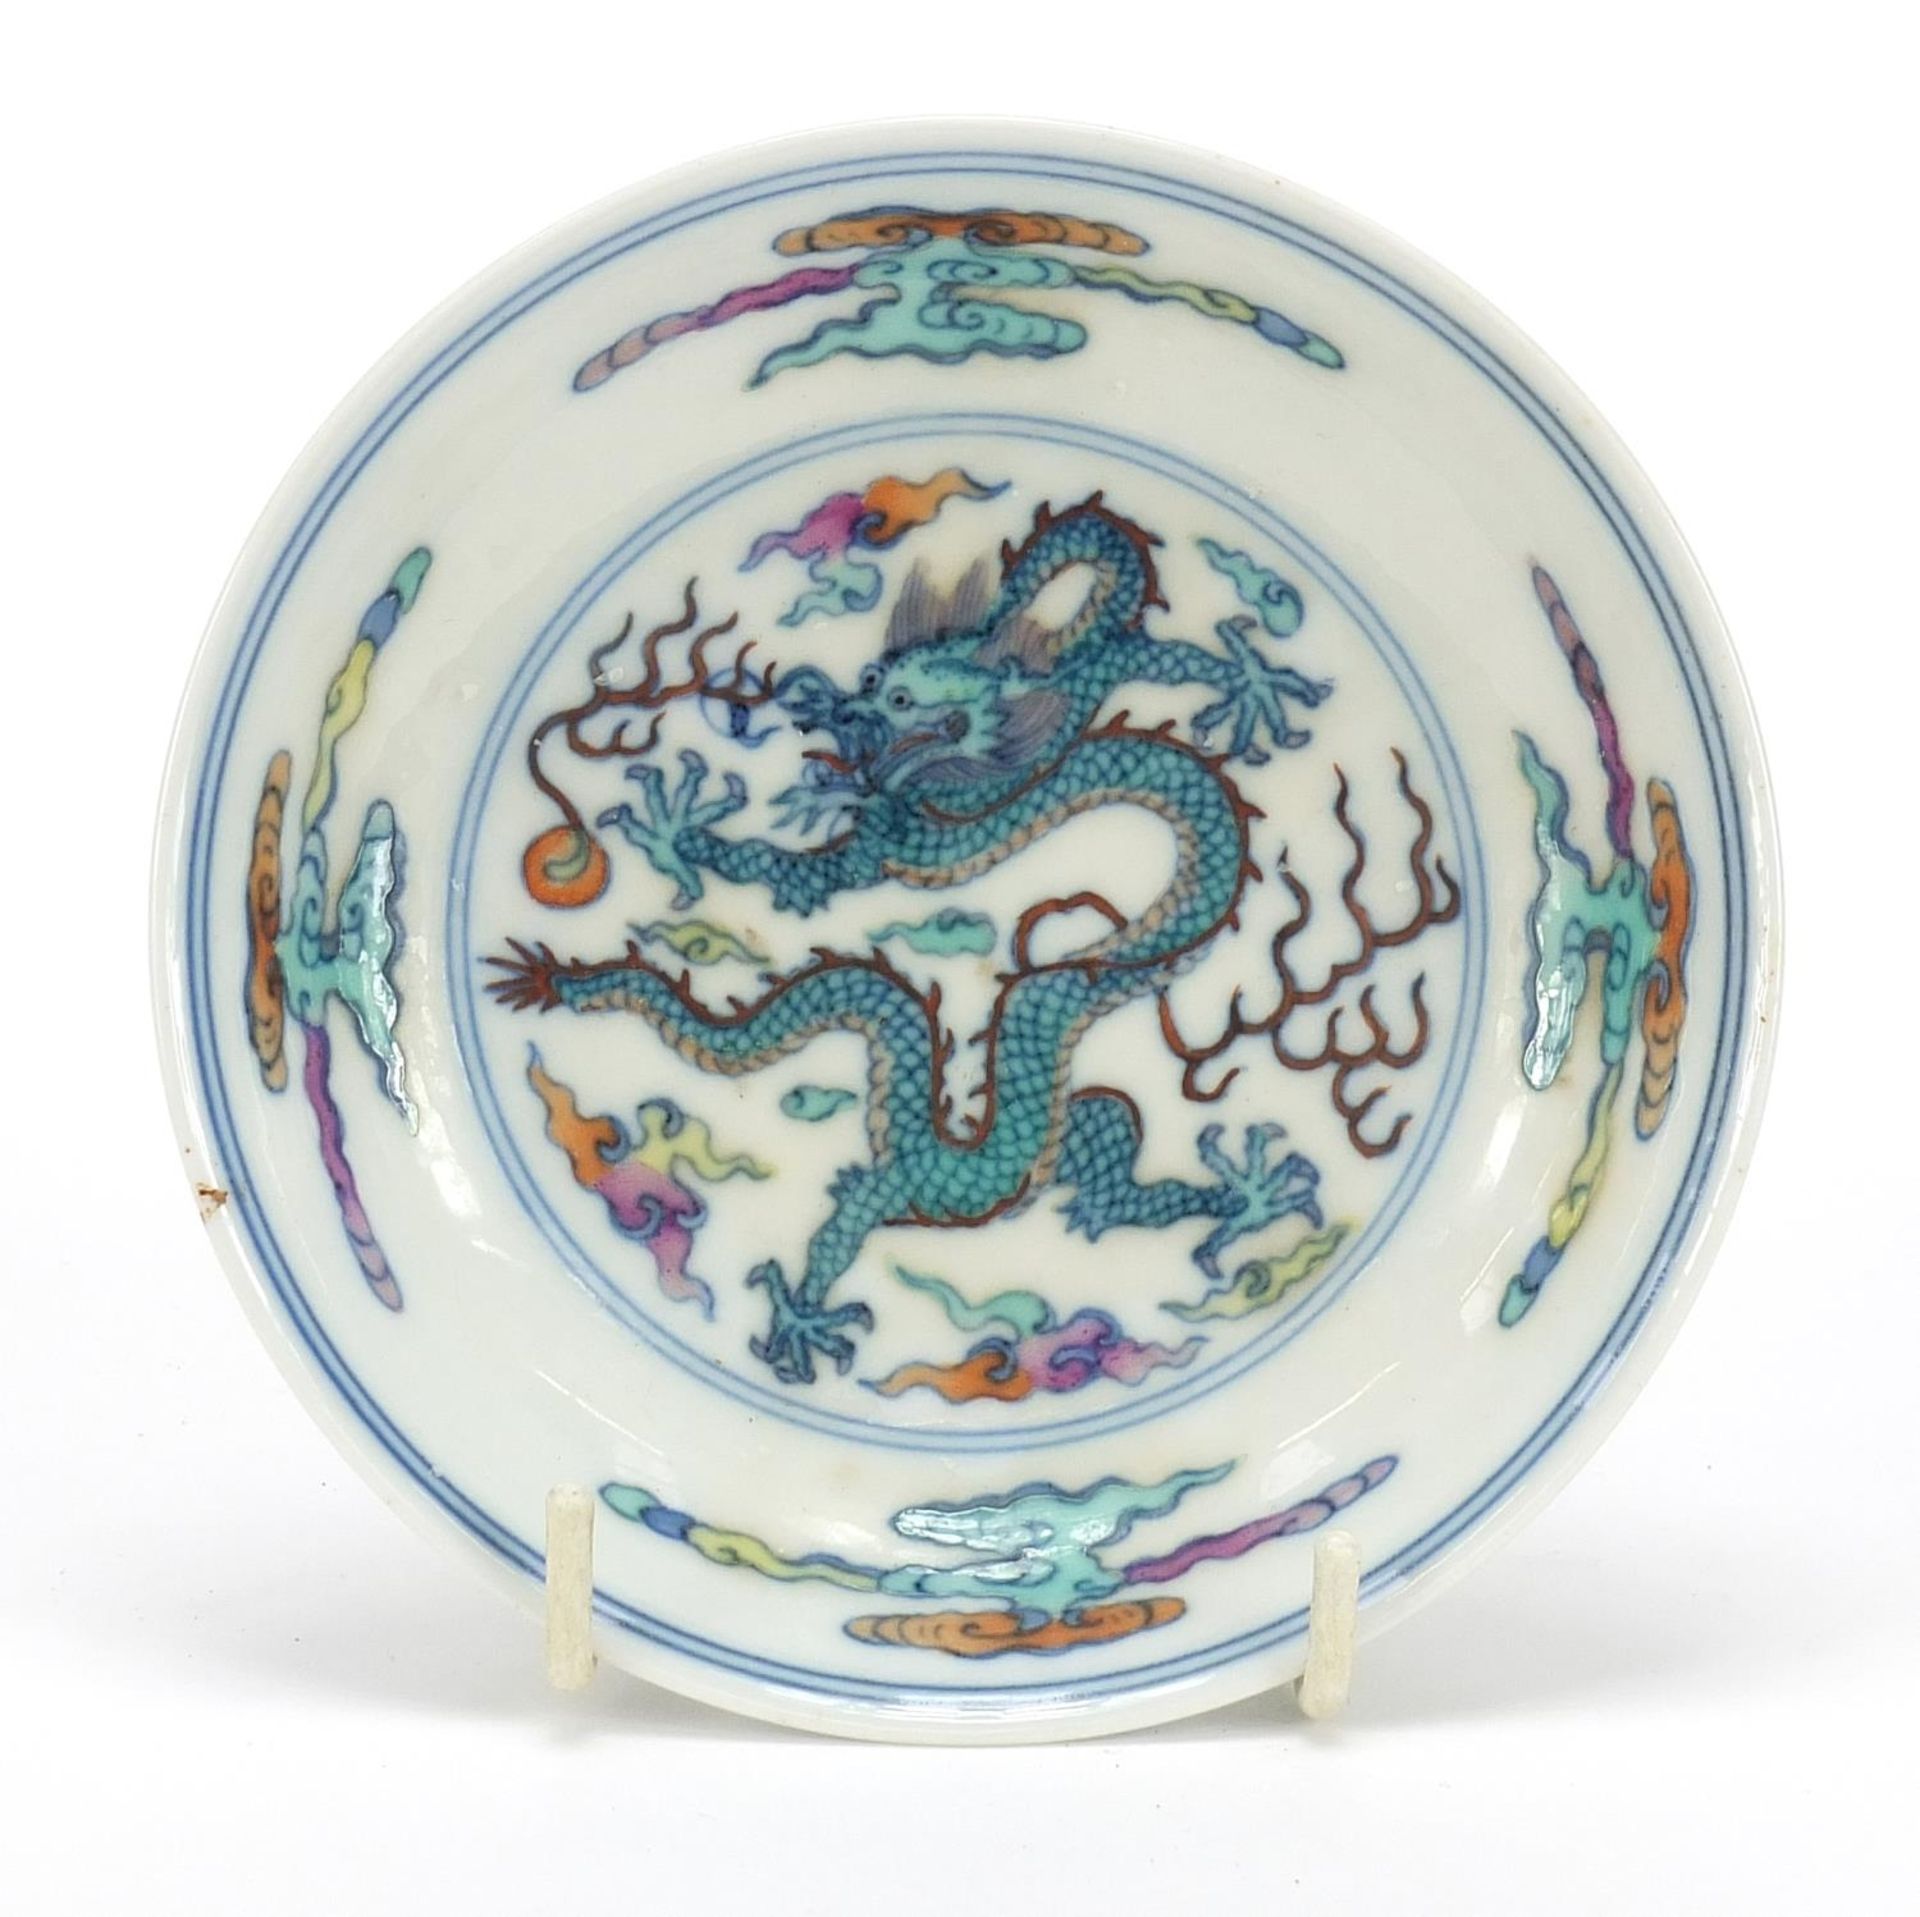 Chinese doucai porcelain dish hand painted with a dragon amongst clouds, six figure character